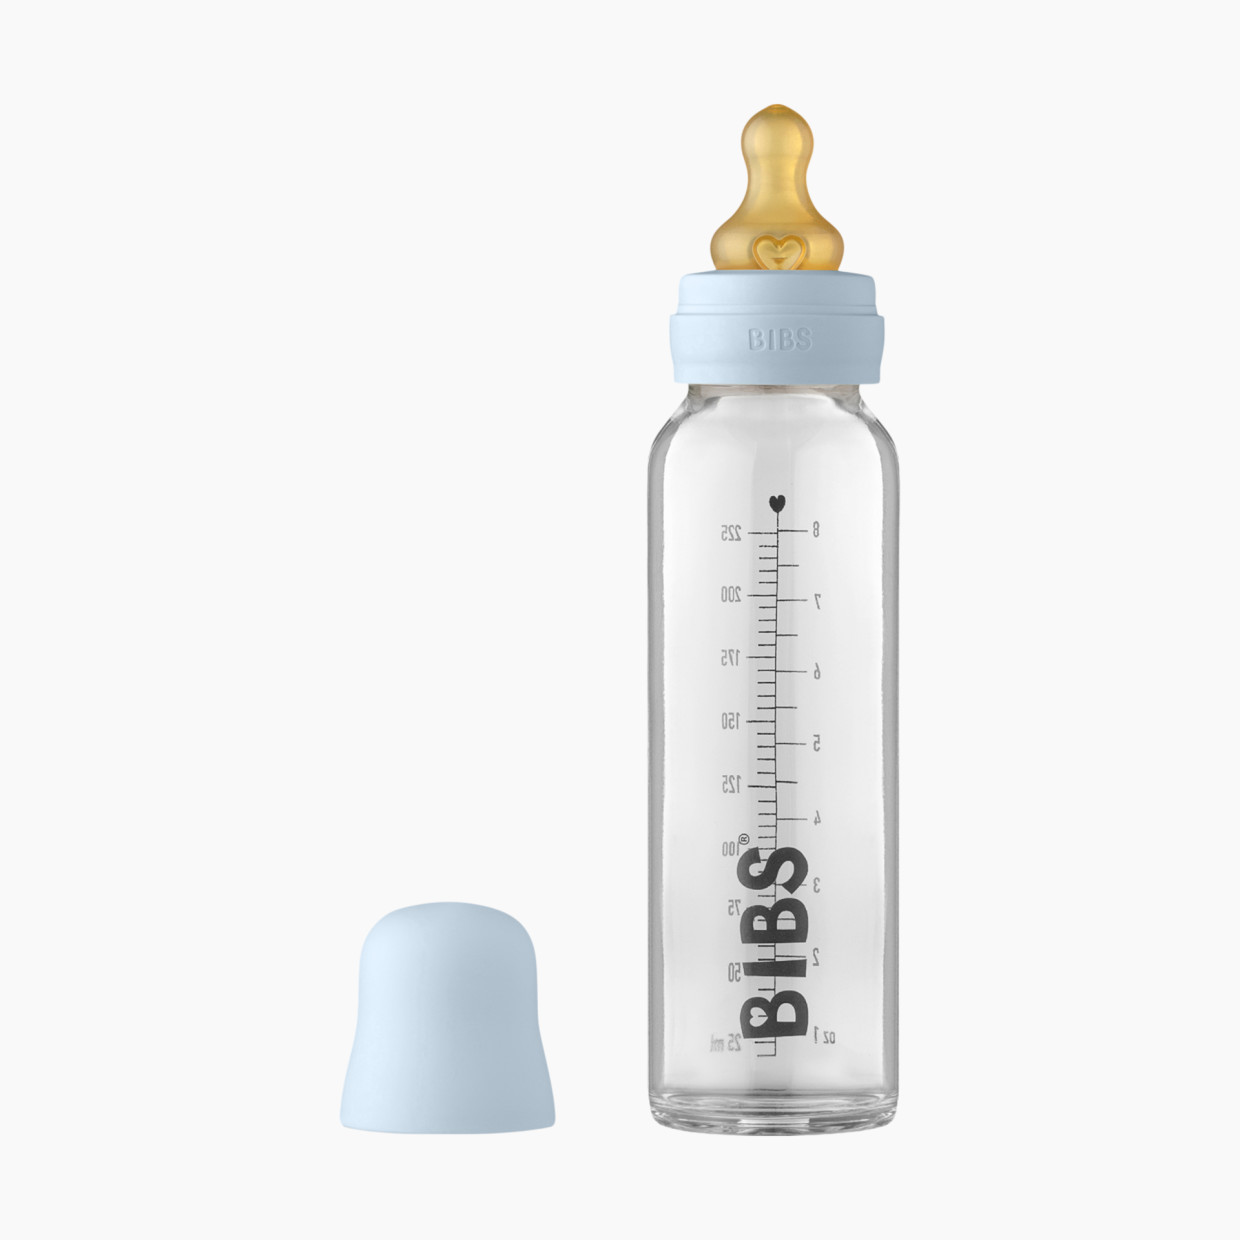 BIBS Baby Glass Bottle Complete Set with Natural Rubber Nipple - Baby Blue, 225ml.